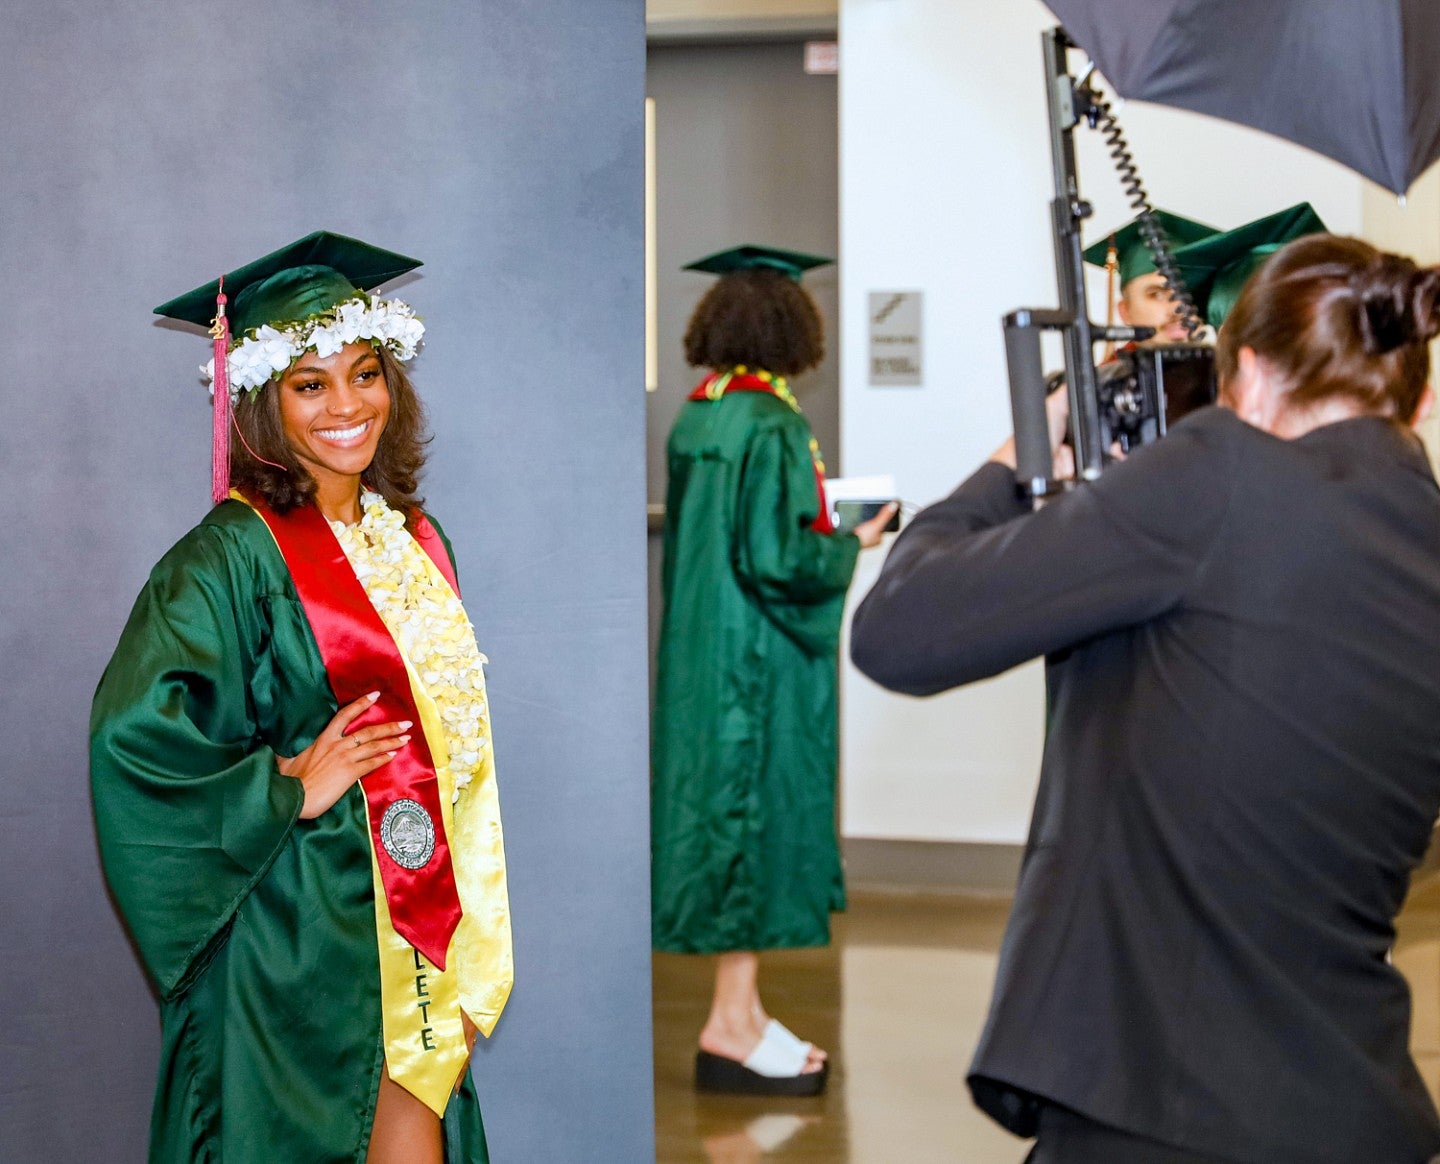 a photographer takes a photo of a student wearing commencement regalia and posing in front of a backdrop